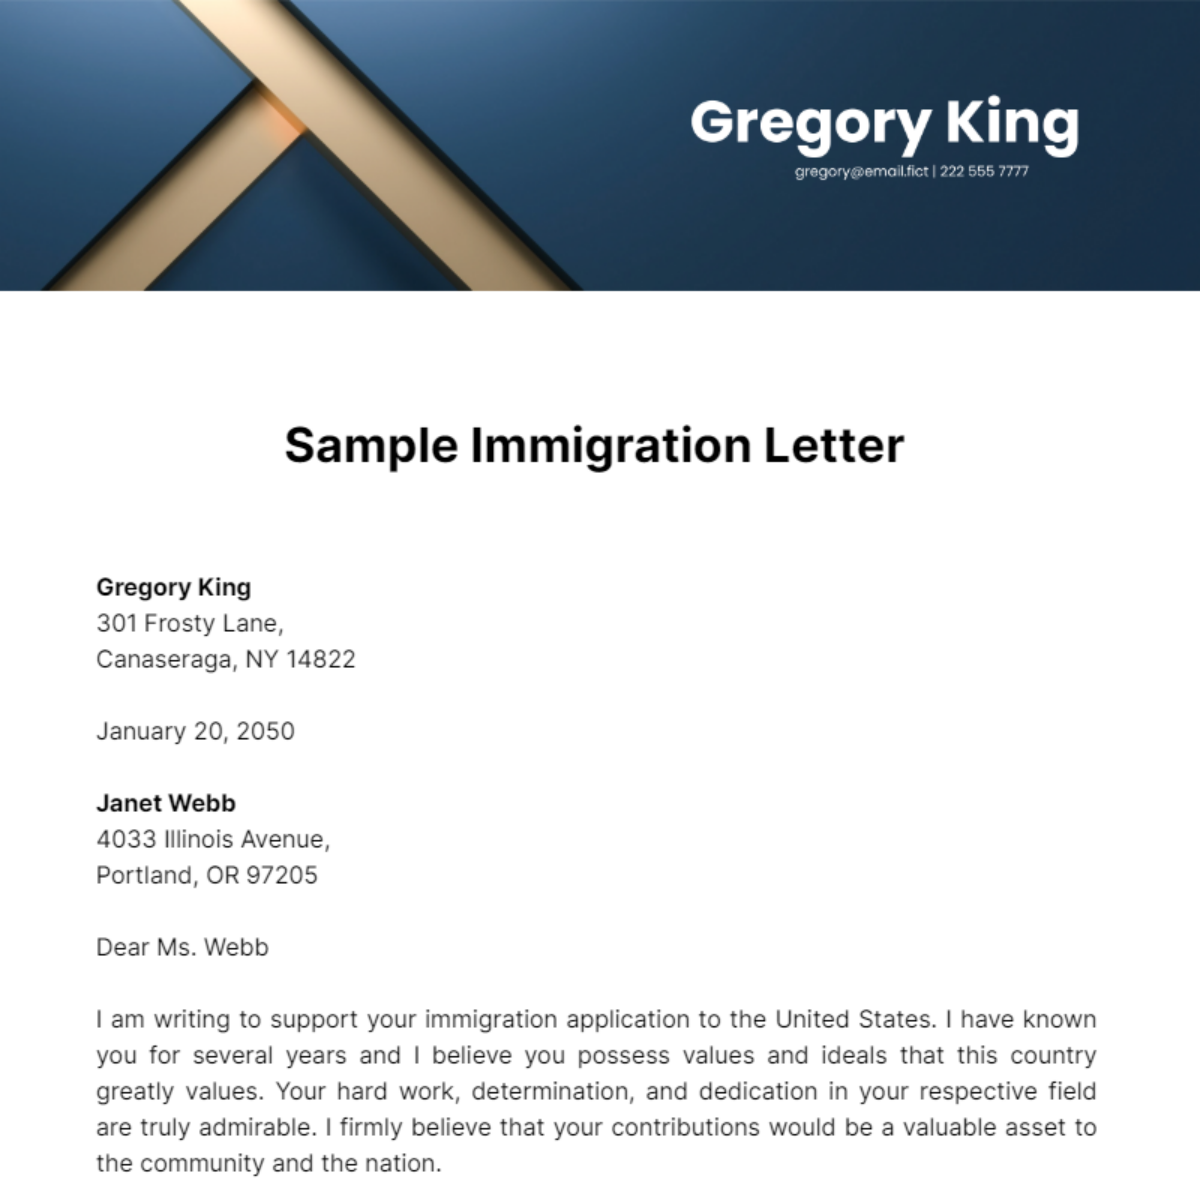 Sample Immigration Letter Template